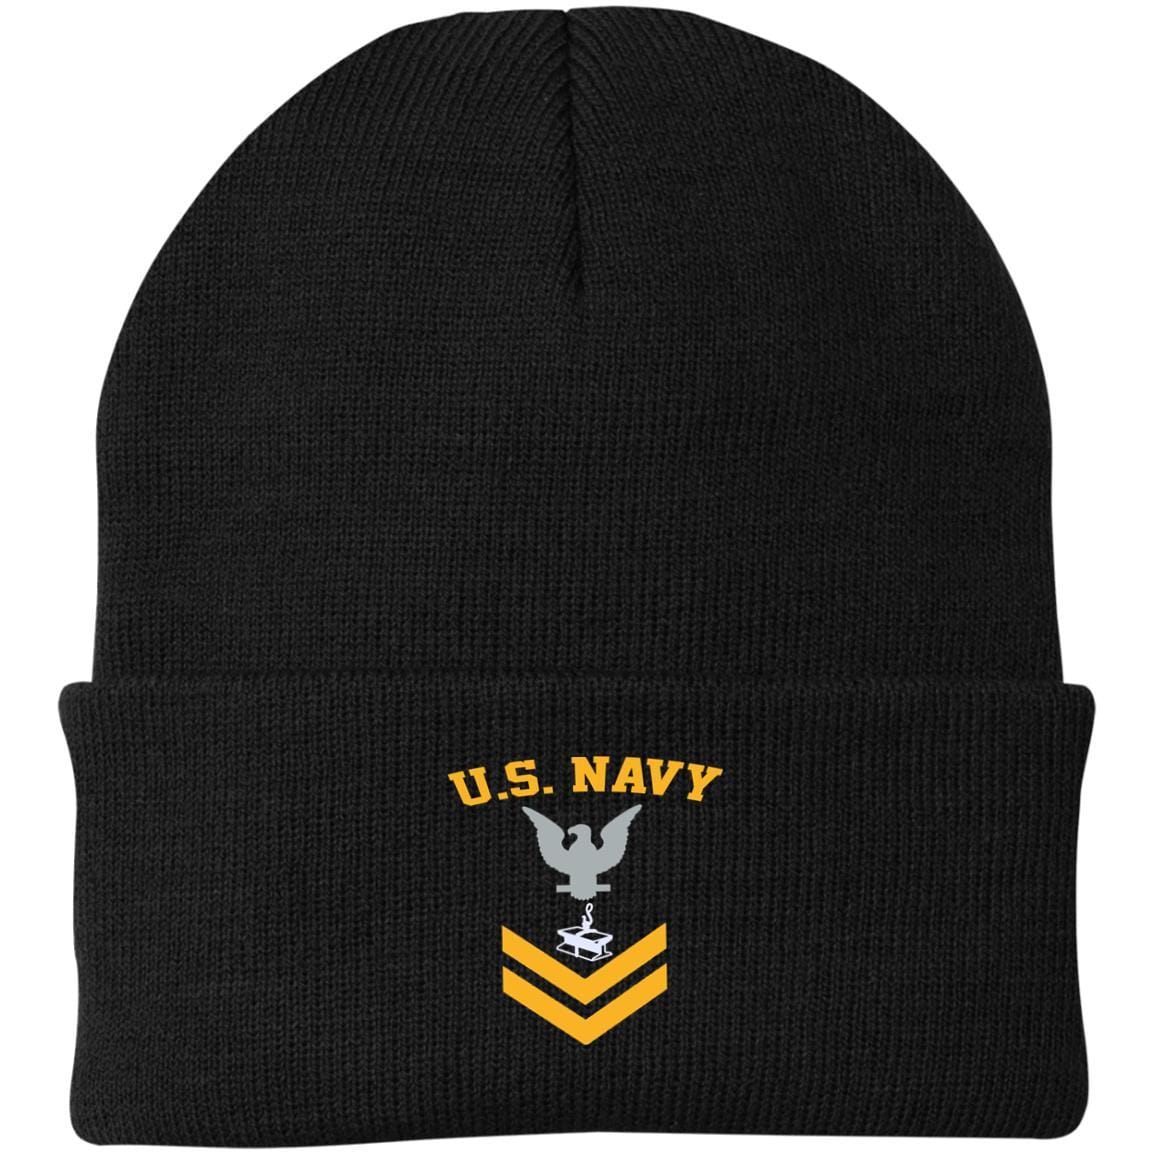 Us Navy Steelworker Sw E-5 Rating Badges Gold Stripe Printed Port Authority Knit Cap